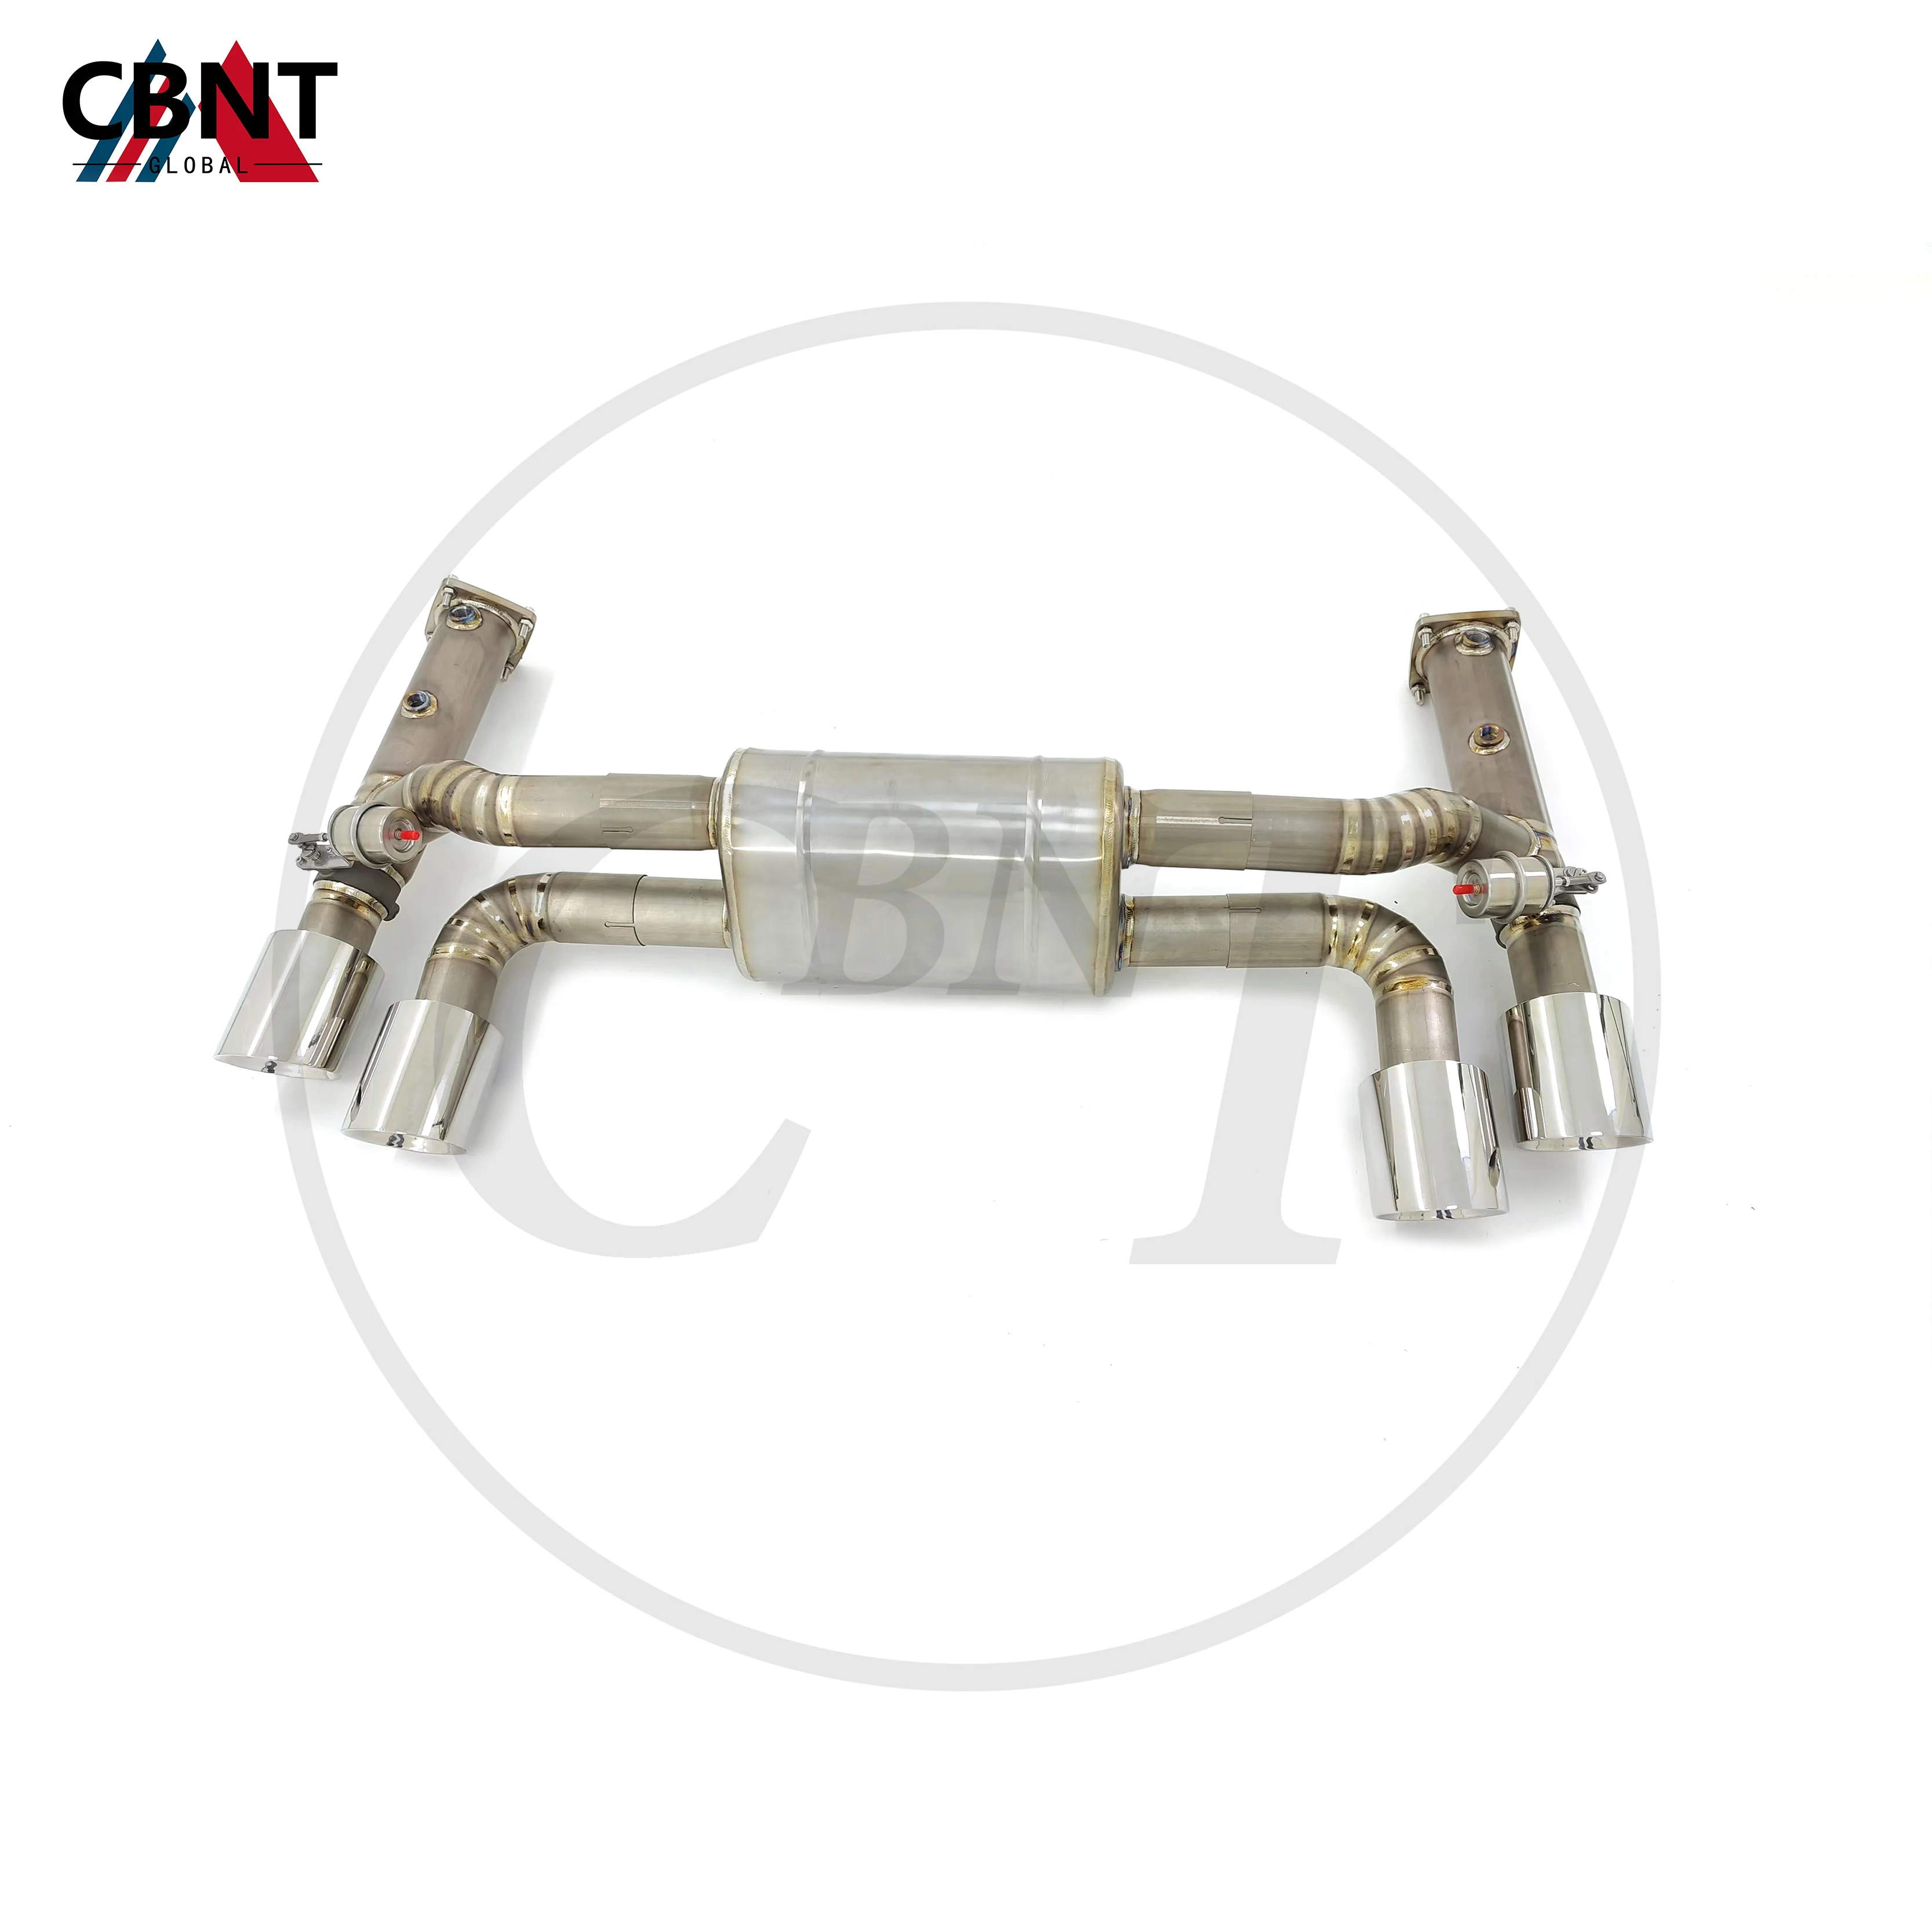 

CBNT Valved Axle-back Exhaust System for Porsche 911 991.2 3.0T Tuning Exhaust-pipe with Valve Muffler Titanium Alloy